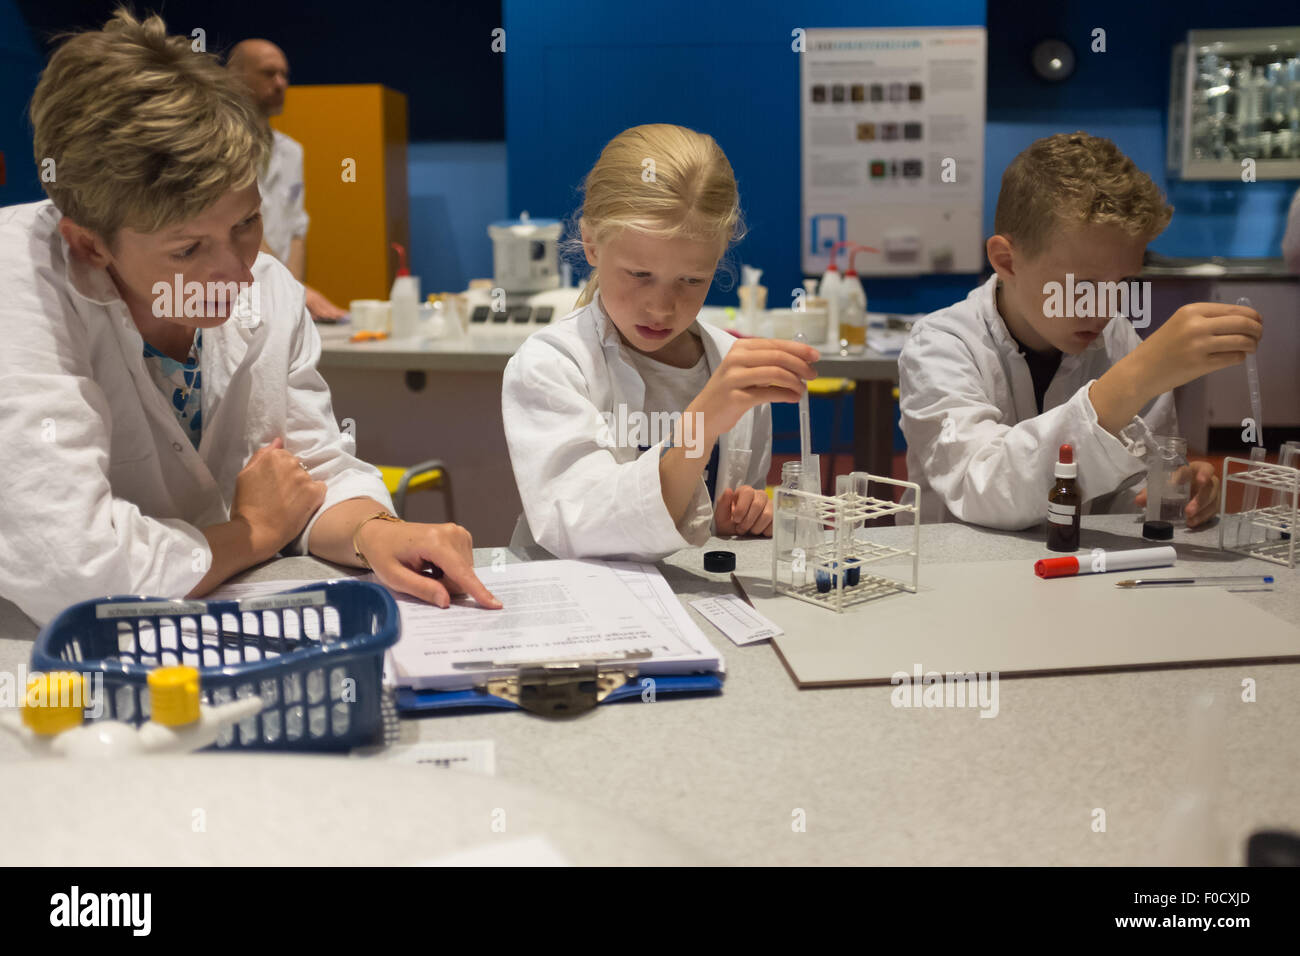 Children in a chemistry lesson doing practical experiments Stock Photo